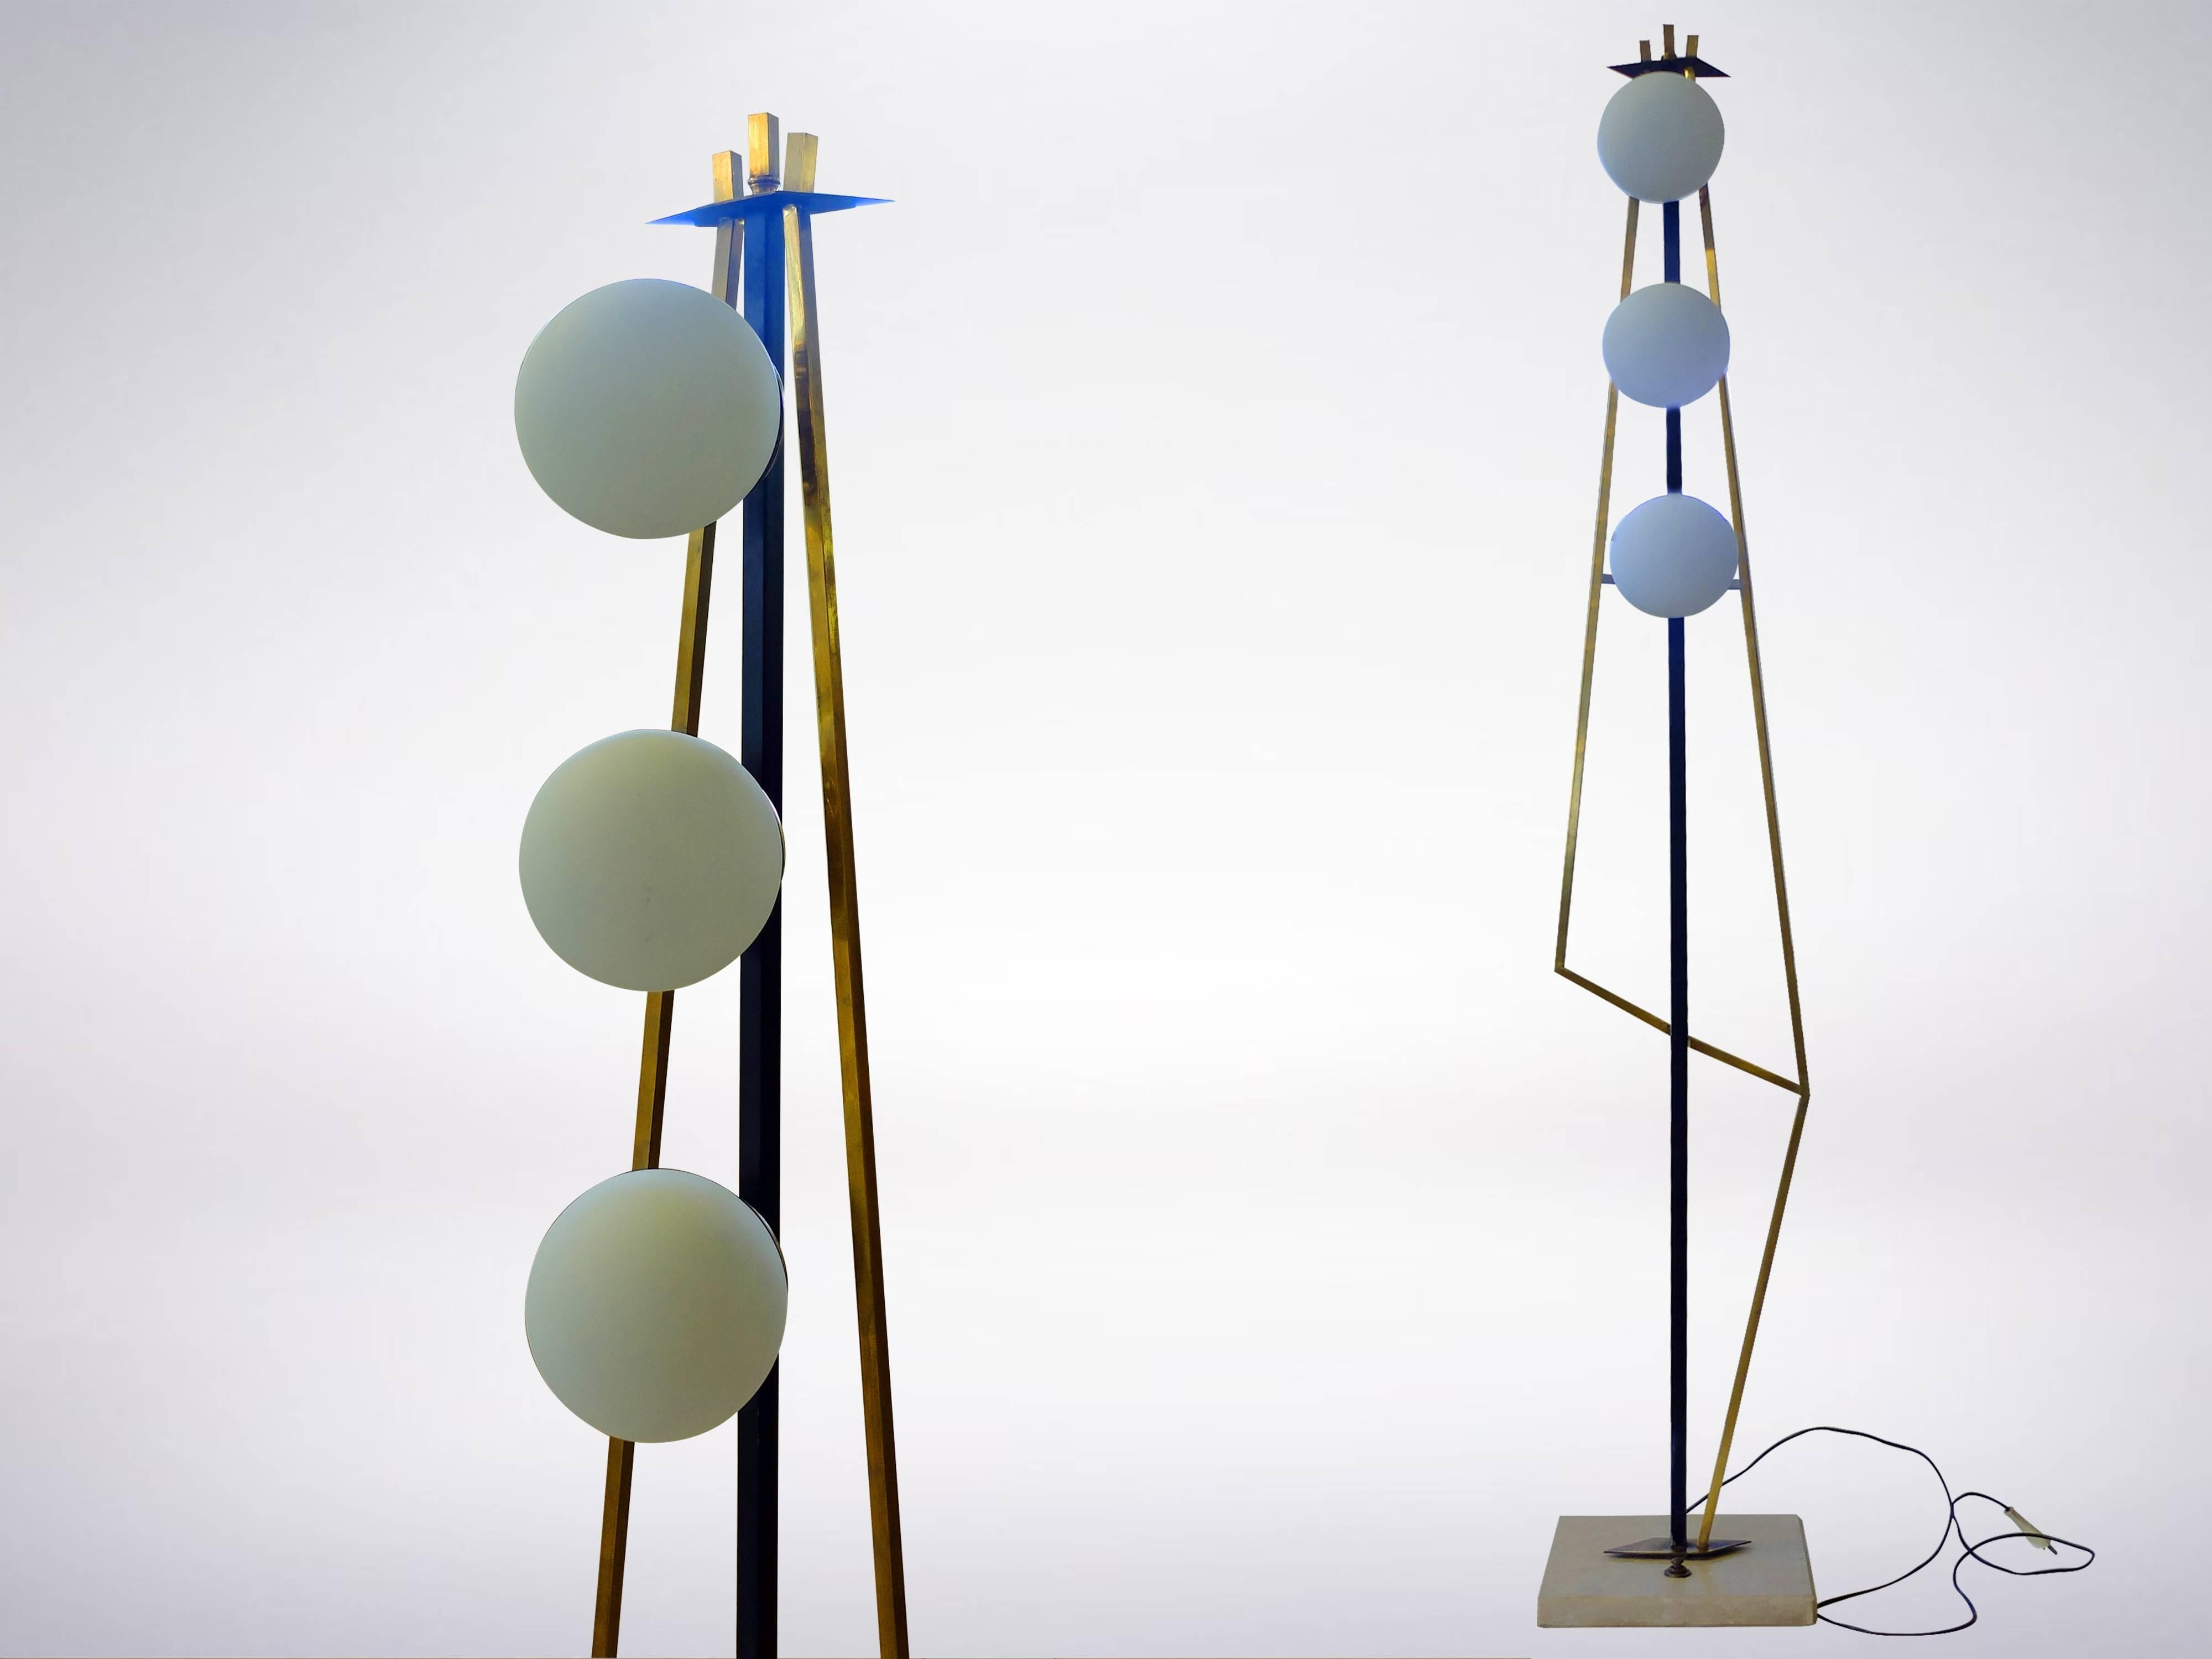 Floor lamp attributed to Stilnovo with an elegant geometric structure created with square-sectioned patinated brass profiles with three frosted glass spheres as diffusers. The base in marble contains the original switch and electrical fittings, all